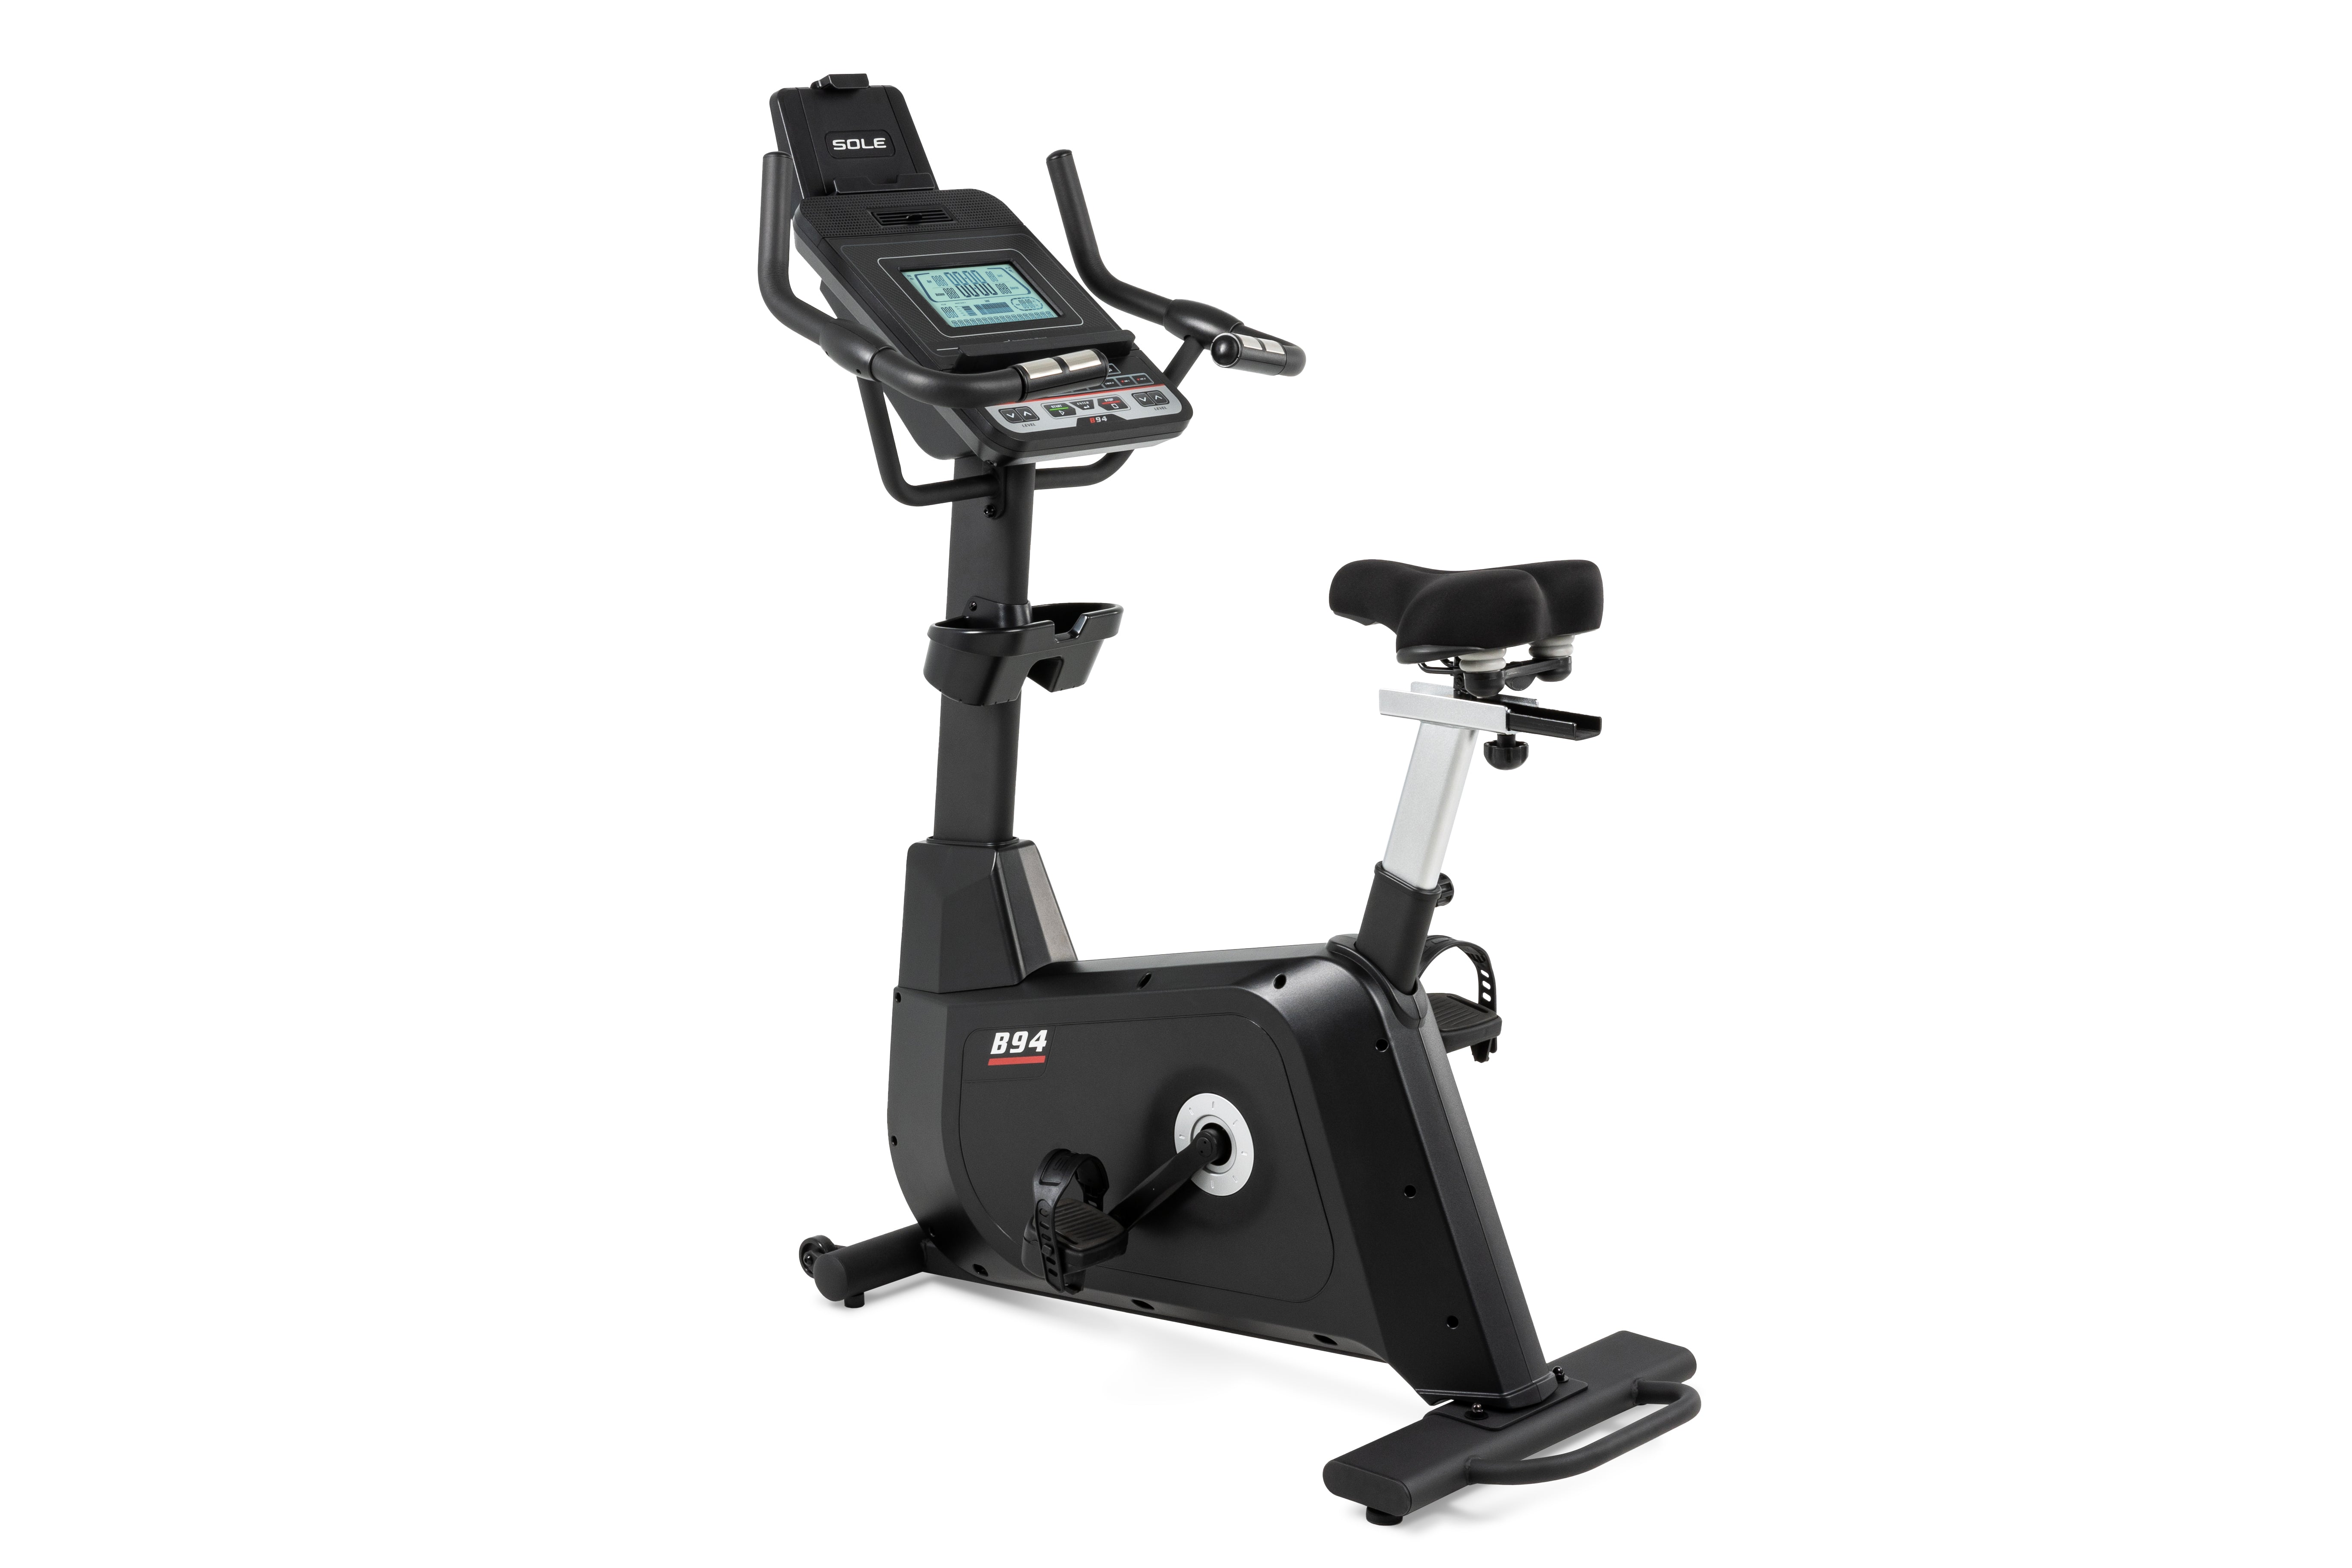 Sole B94 stationary bike featuring an advanced digital console with multiple buttons, ergonomic handlebars, an adjustable padded seat, and a solid frame with the B94 branding on the side.